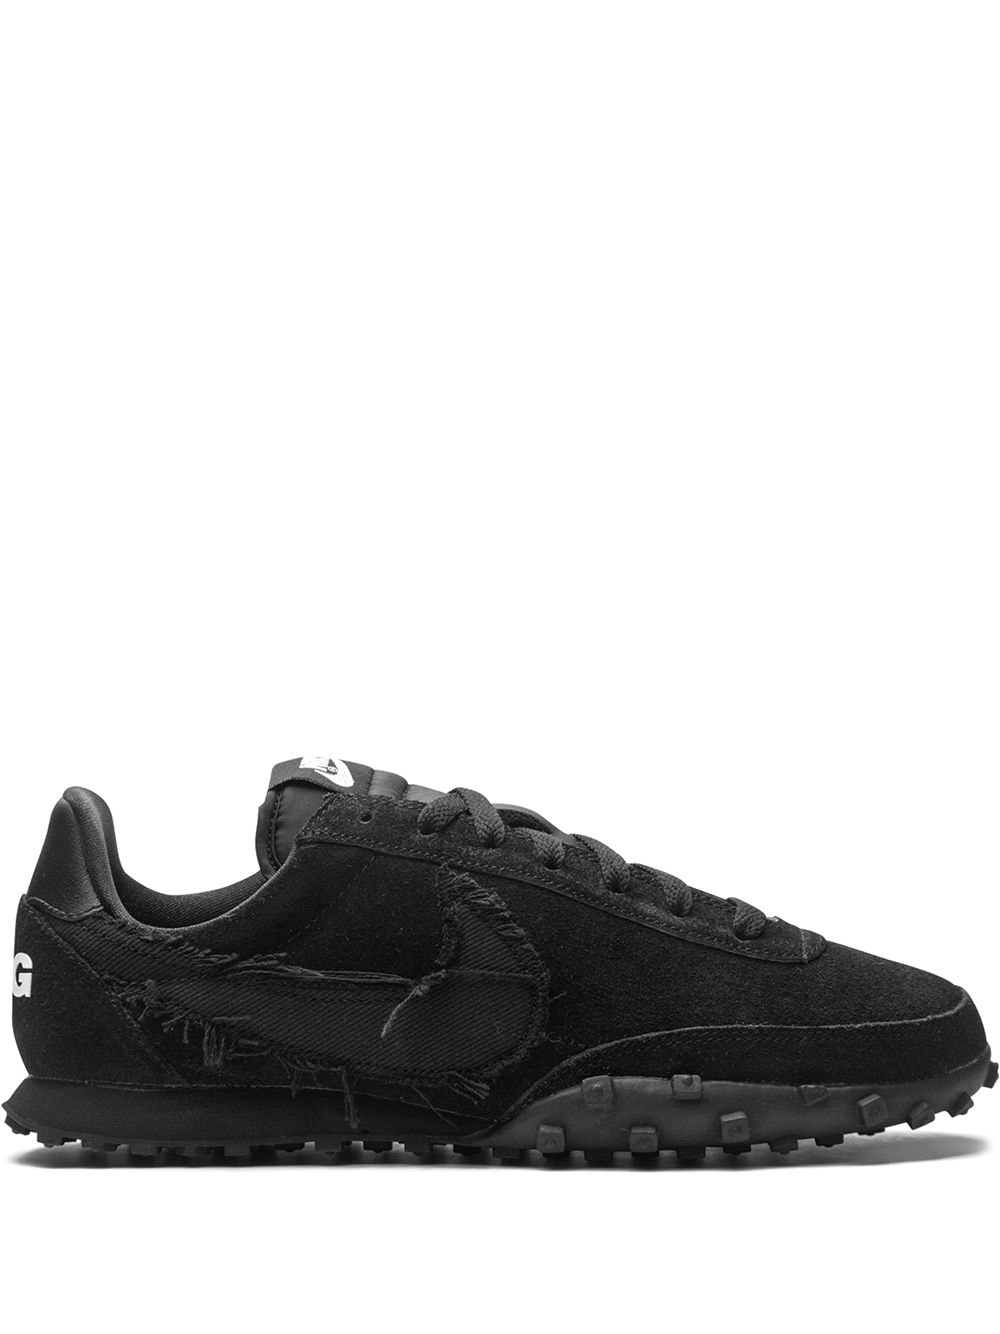 Nike Waffle Racer ""Comme des Garcons - Black" sneakers von Nike